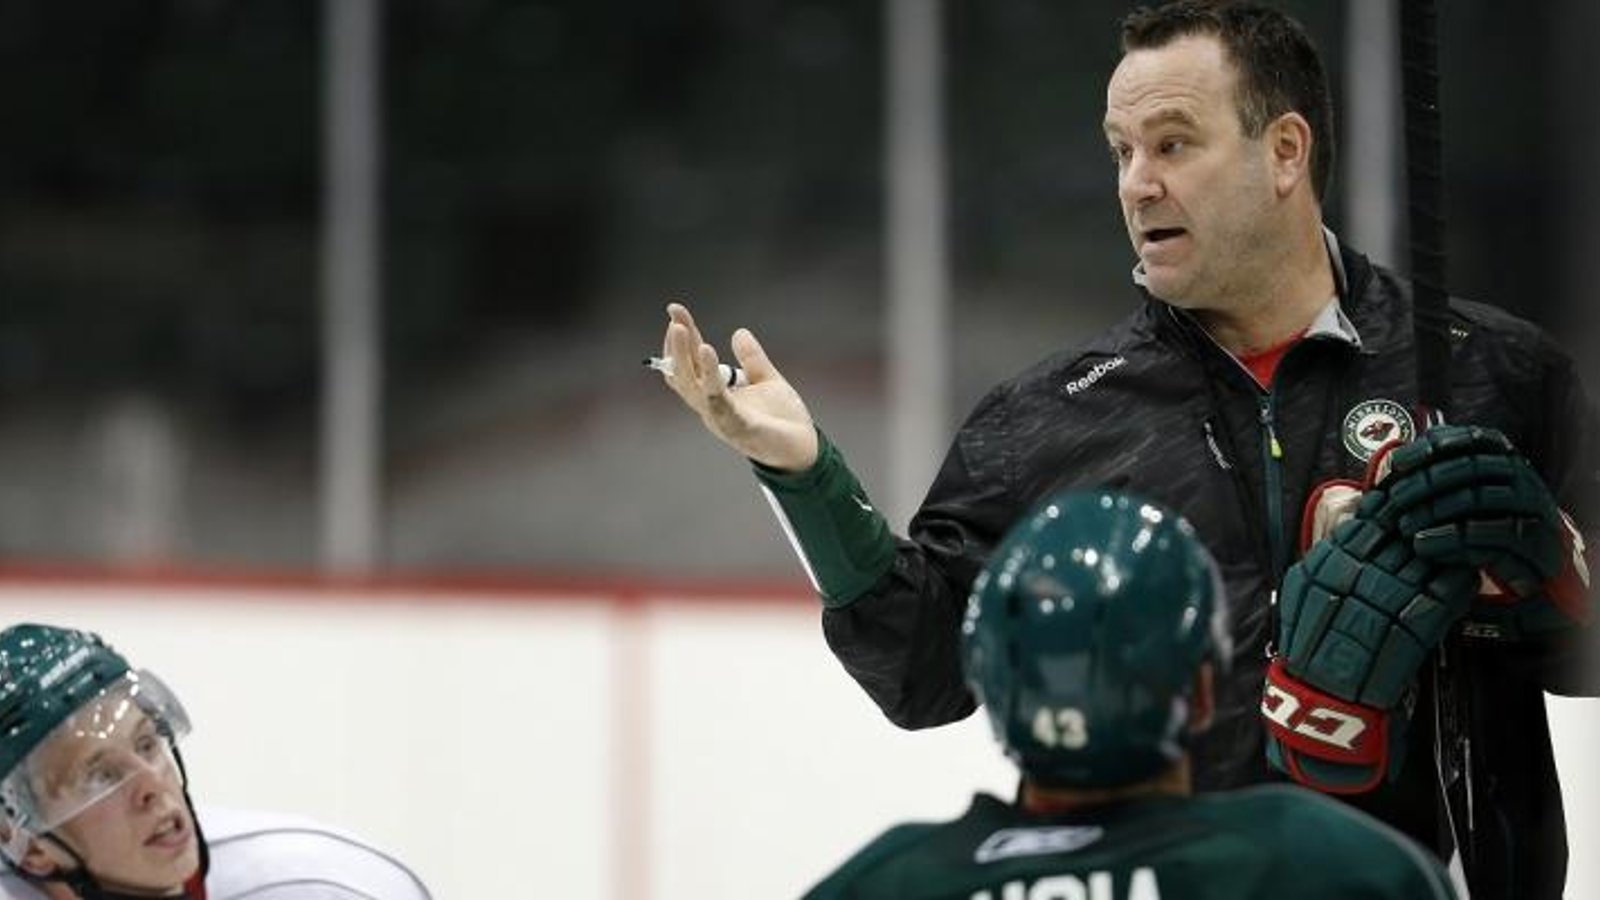 Wild coach makes a statement after embarrassing loss.